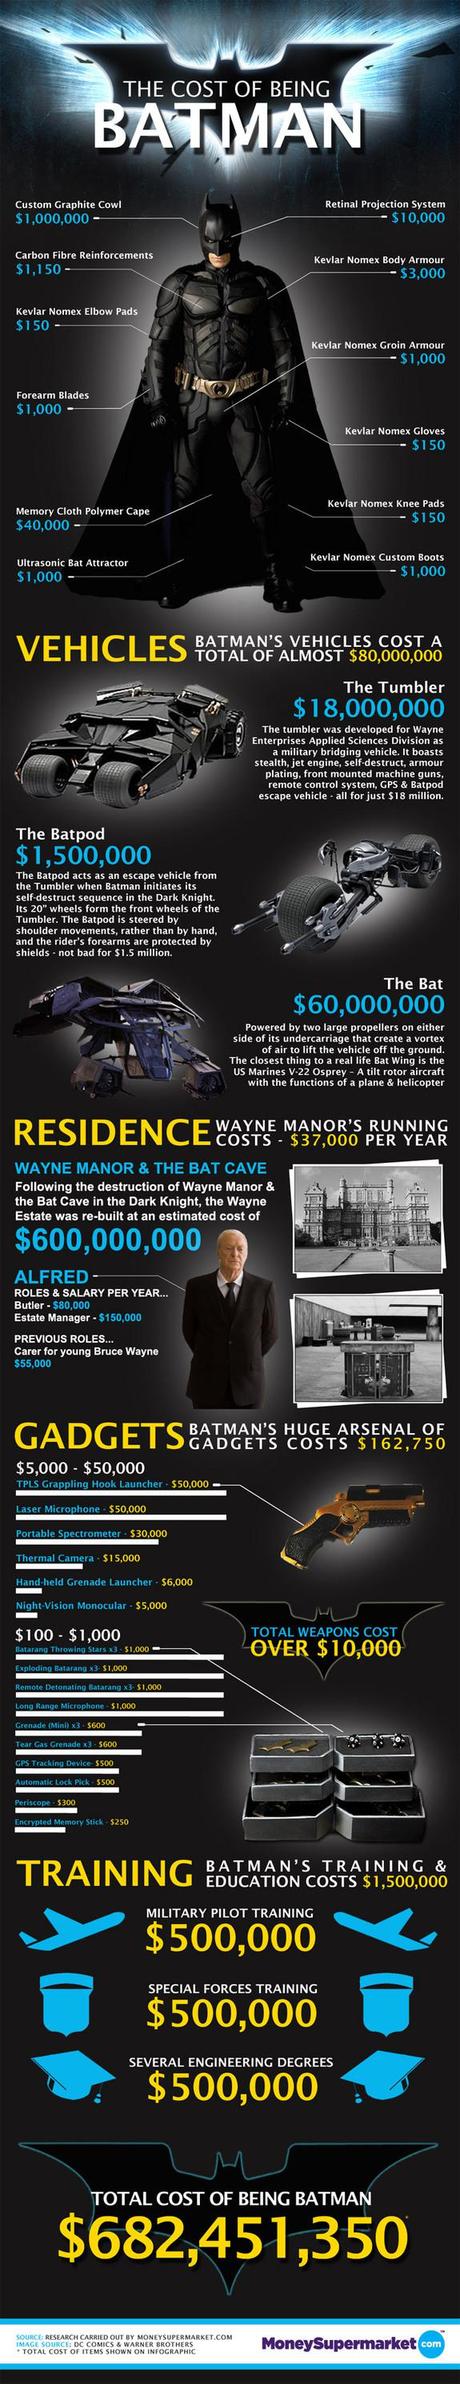 The Cost of being Batman